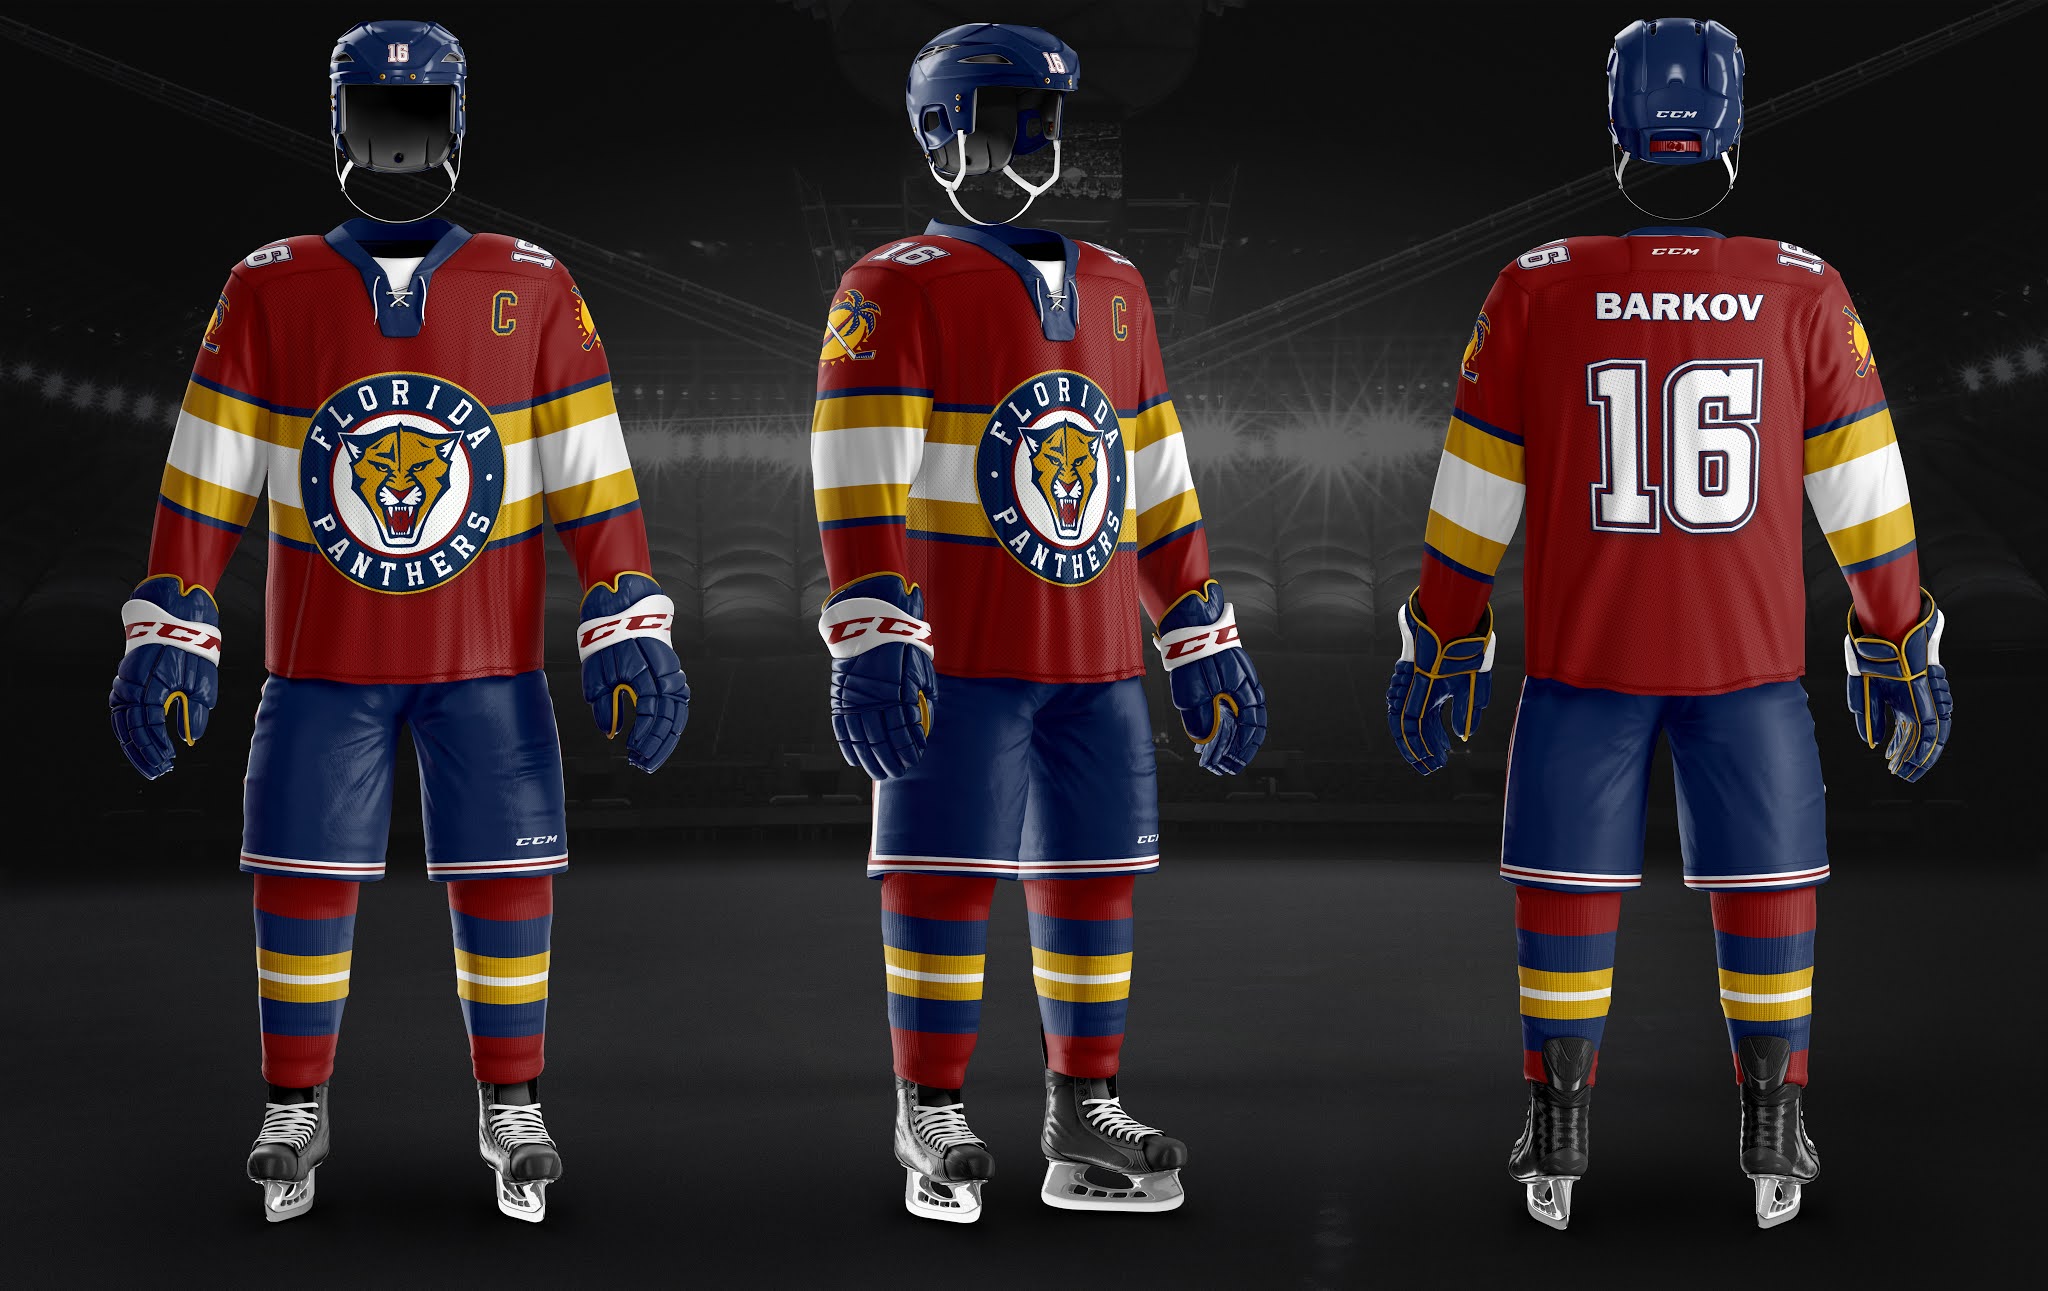 Florida Panthers - Logo Concept and Uniform Prediction on Behance